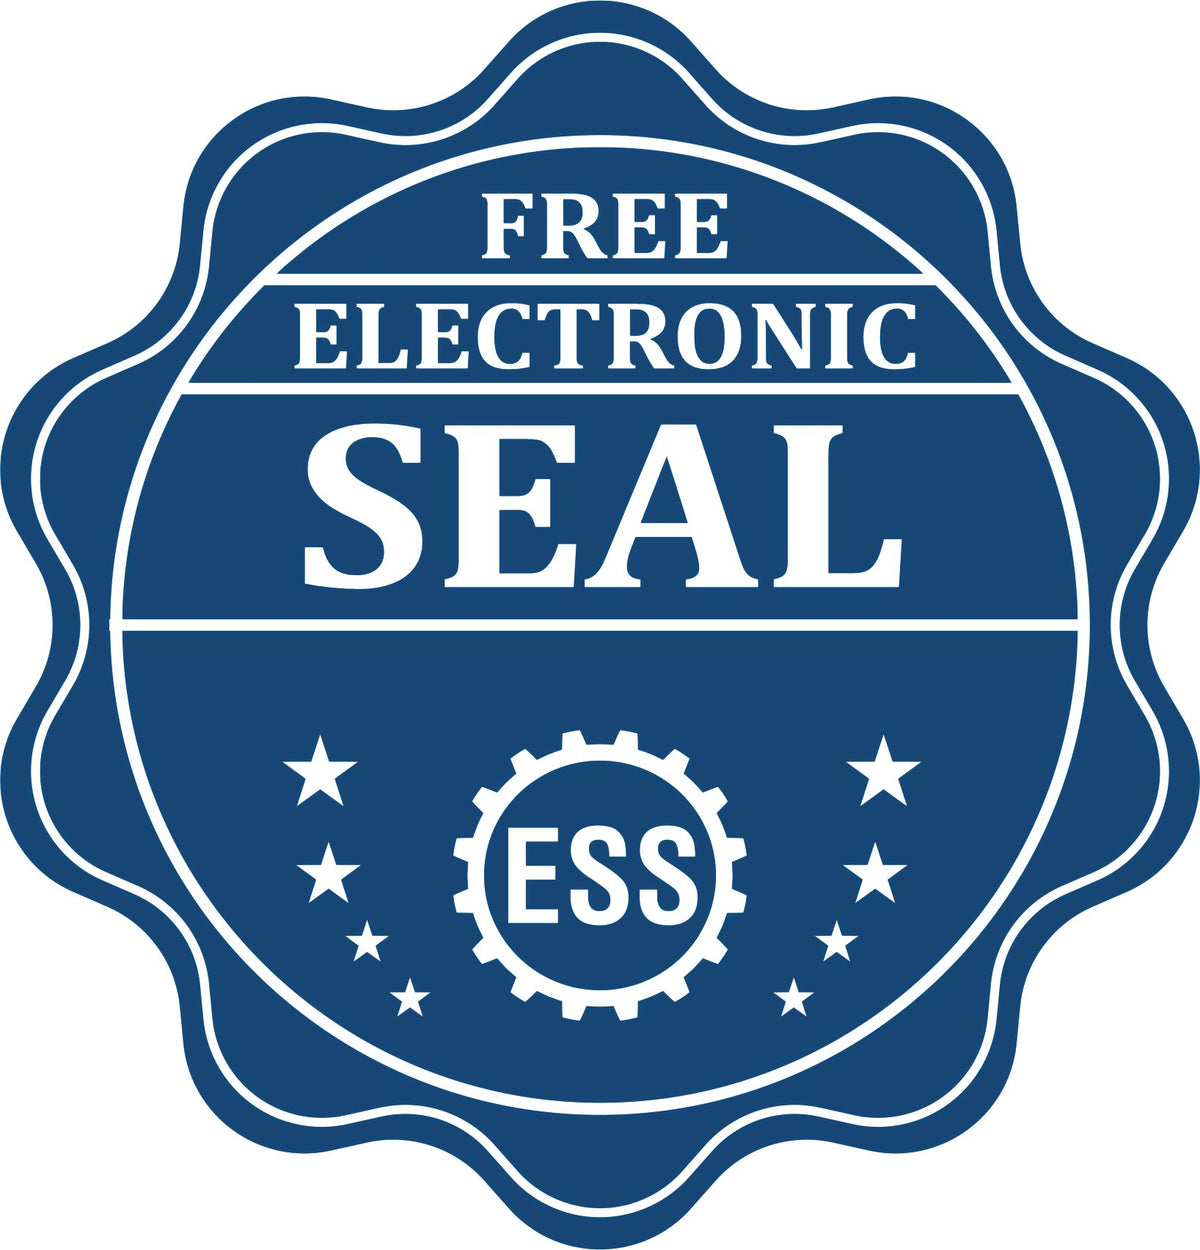 A badge showing a free electronic seal for the Heavy-Duty Oklahoma Rectangular Notary Stamp with stars and the ESS gear on the emblem.